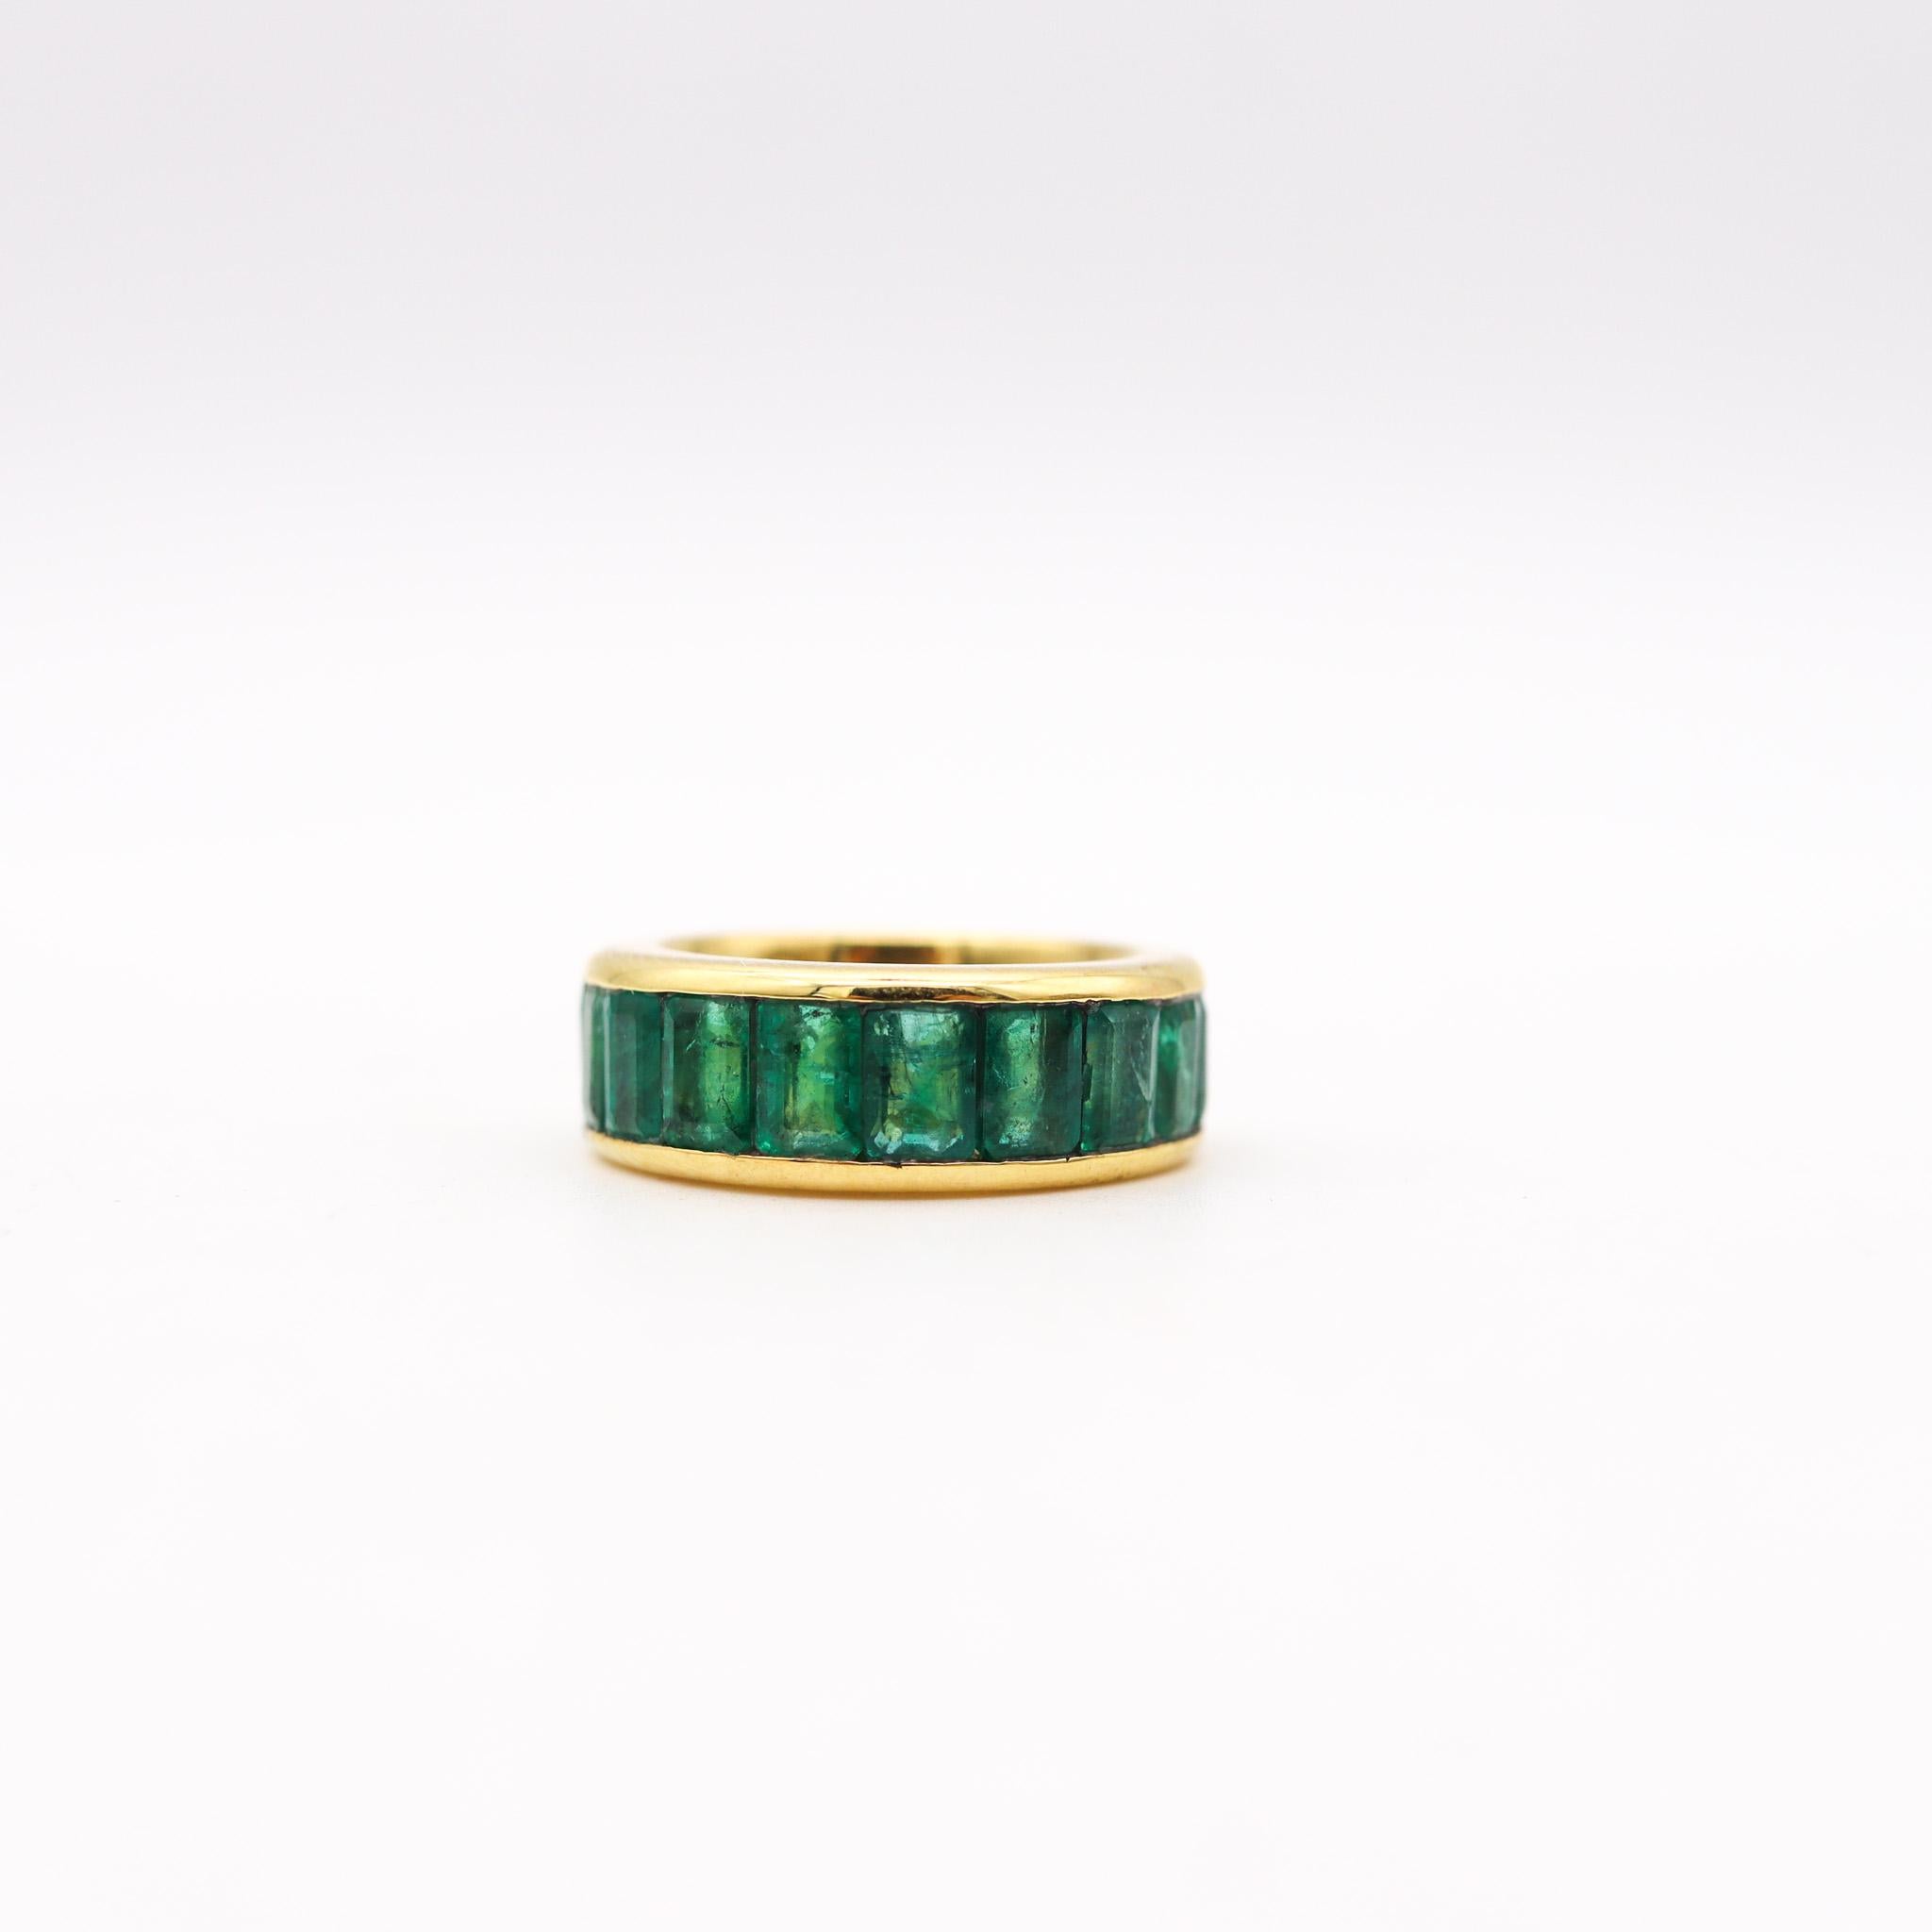 An eternity ring band with Natural Emeralds.

Modern eternity band ring crafted in solid yellow gold of 18 karats white gold, with high polished finish. Designed with a bold and thick solid look and  mounted in a channel-setting, with 12 calibrated